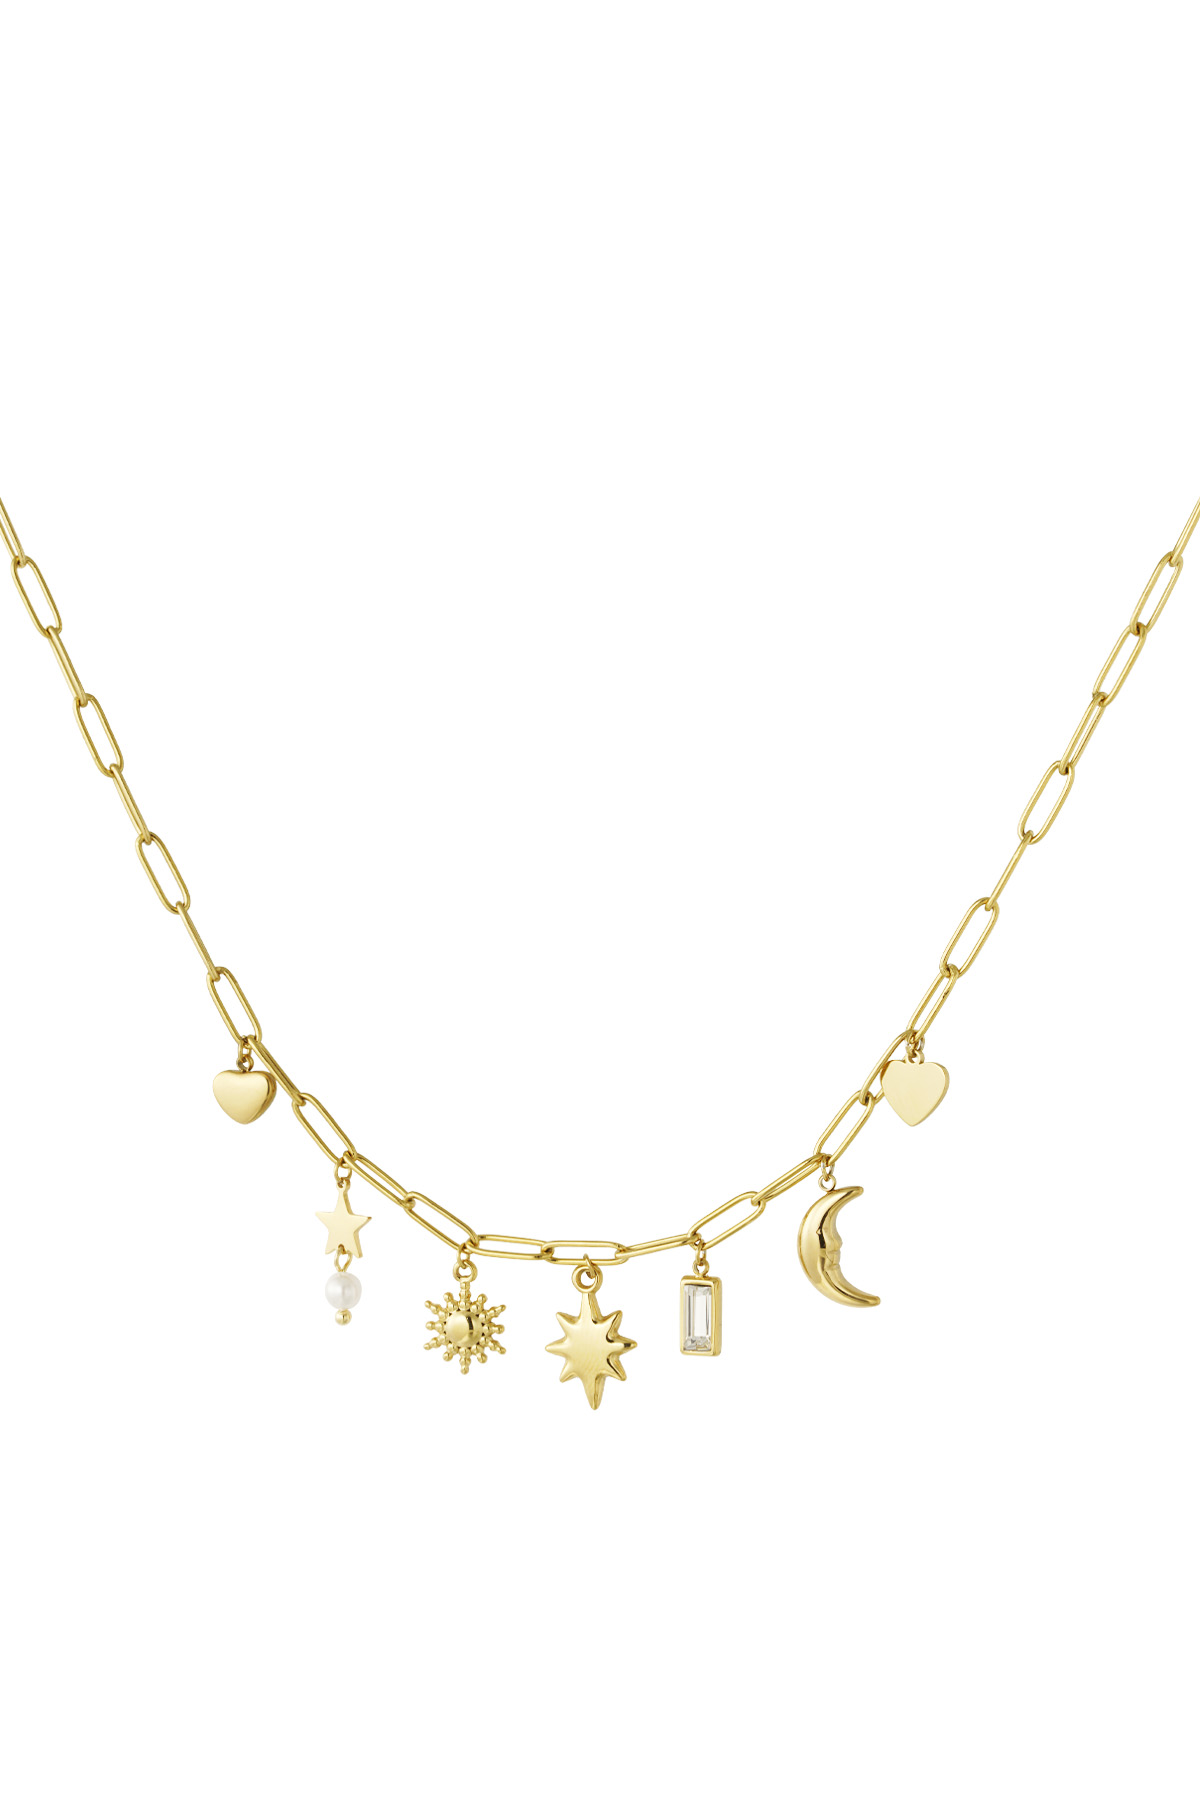 Day and night charm necklace - gold 